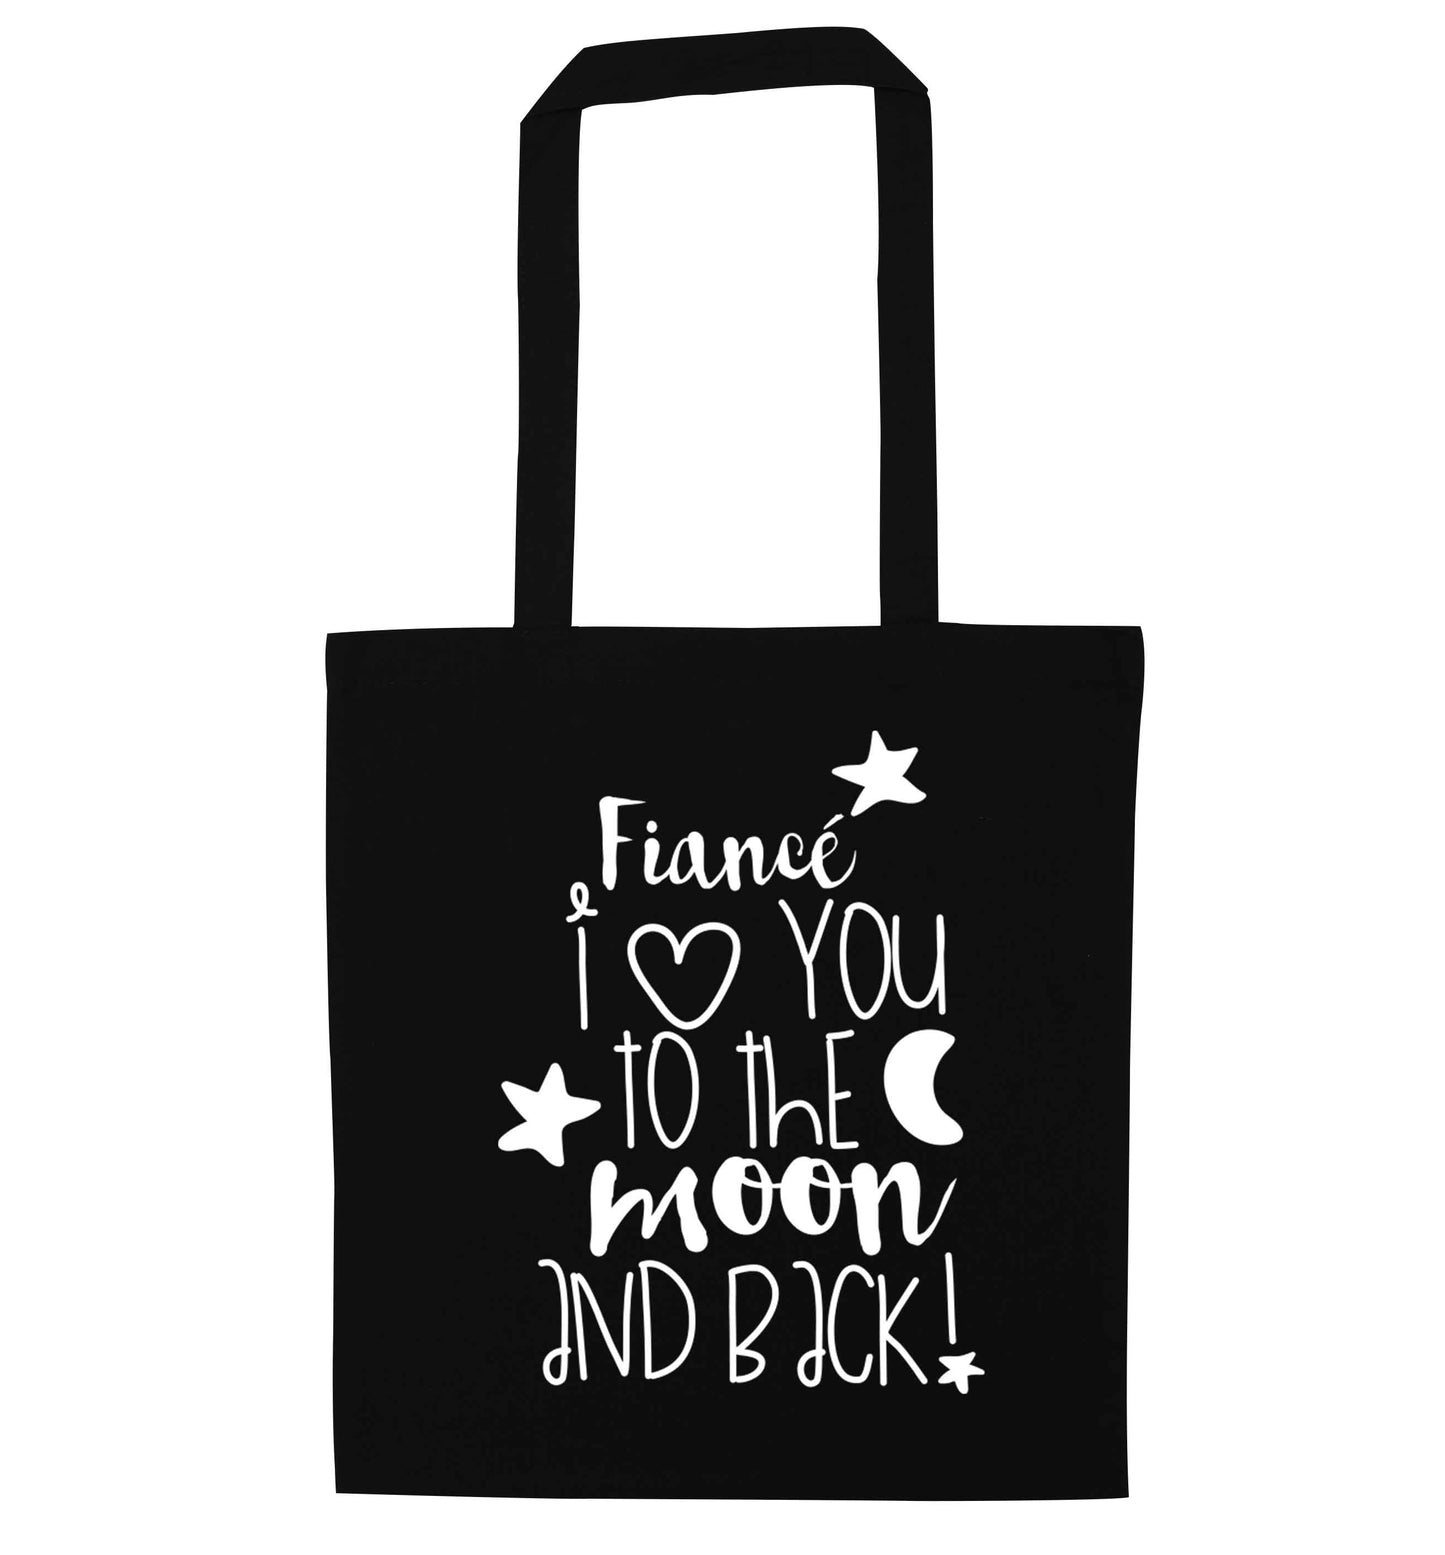 Fiancé I love you to the moon and back black tote bag